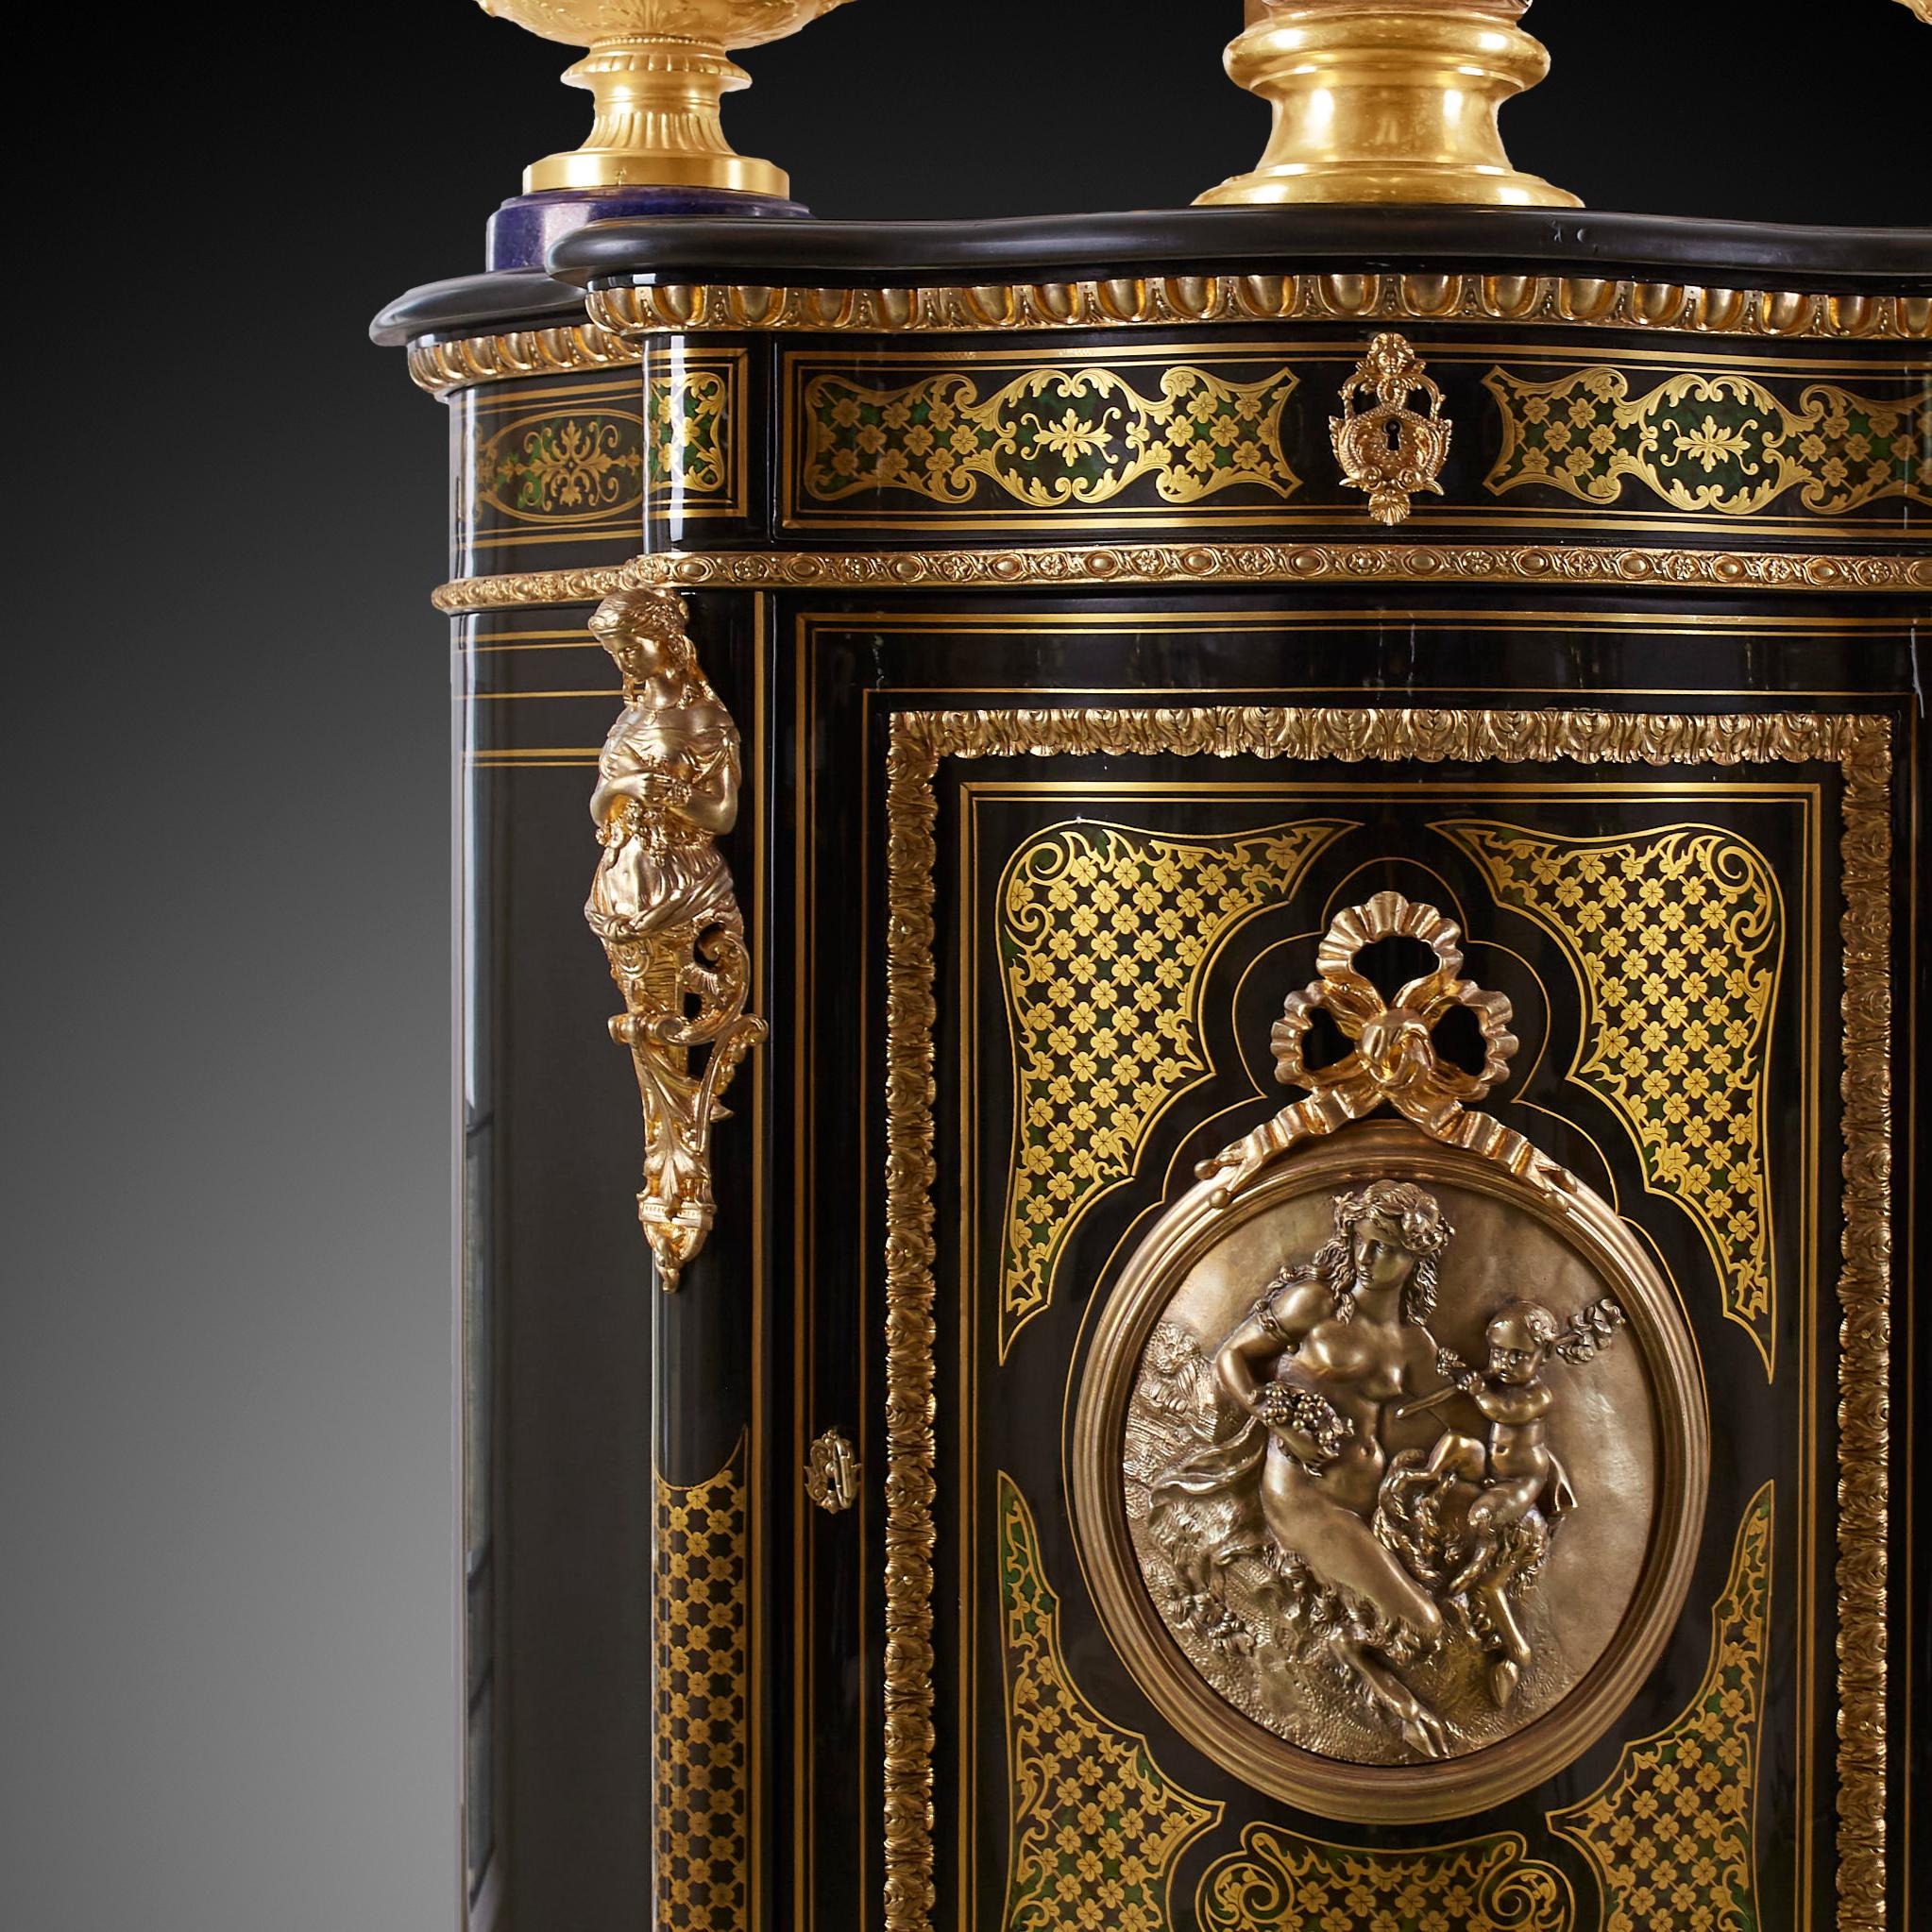 French antique Boulle cabinet.
Wood is decorated with inlaid brass and turtle, bronze details outside.
Inside the cabinet there are two shelves.
Cabinet top is marble.
Perfect condition, renovated according to the museum's procedures.